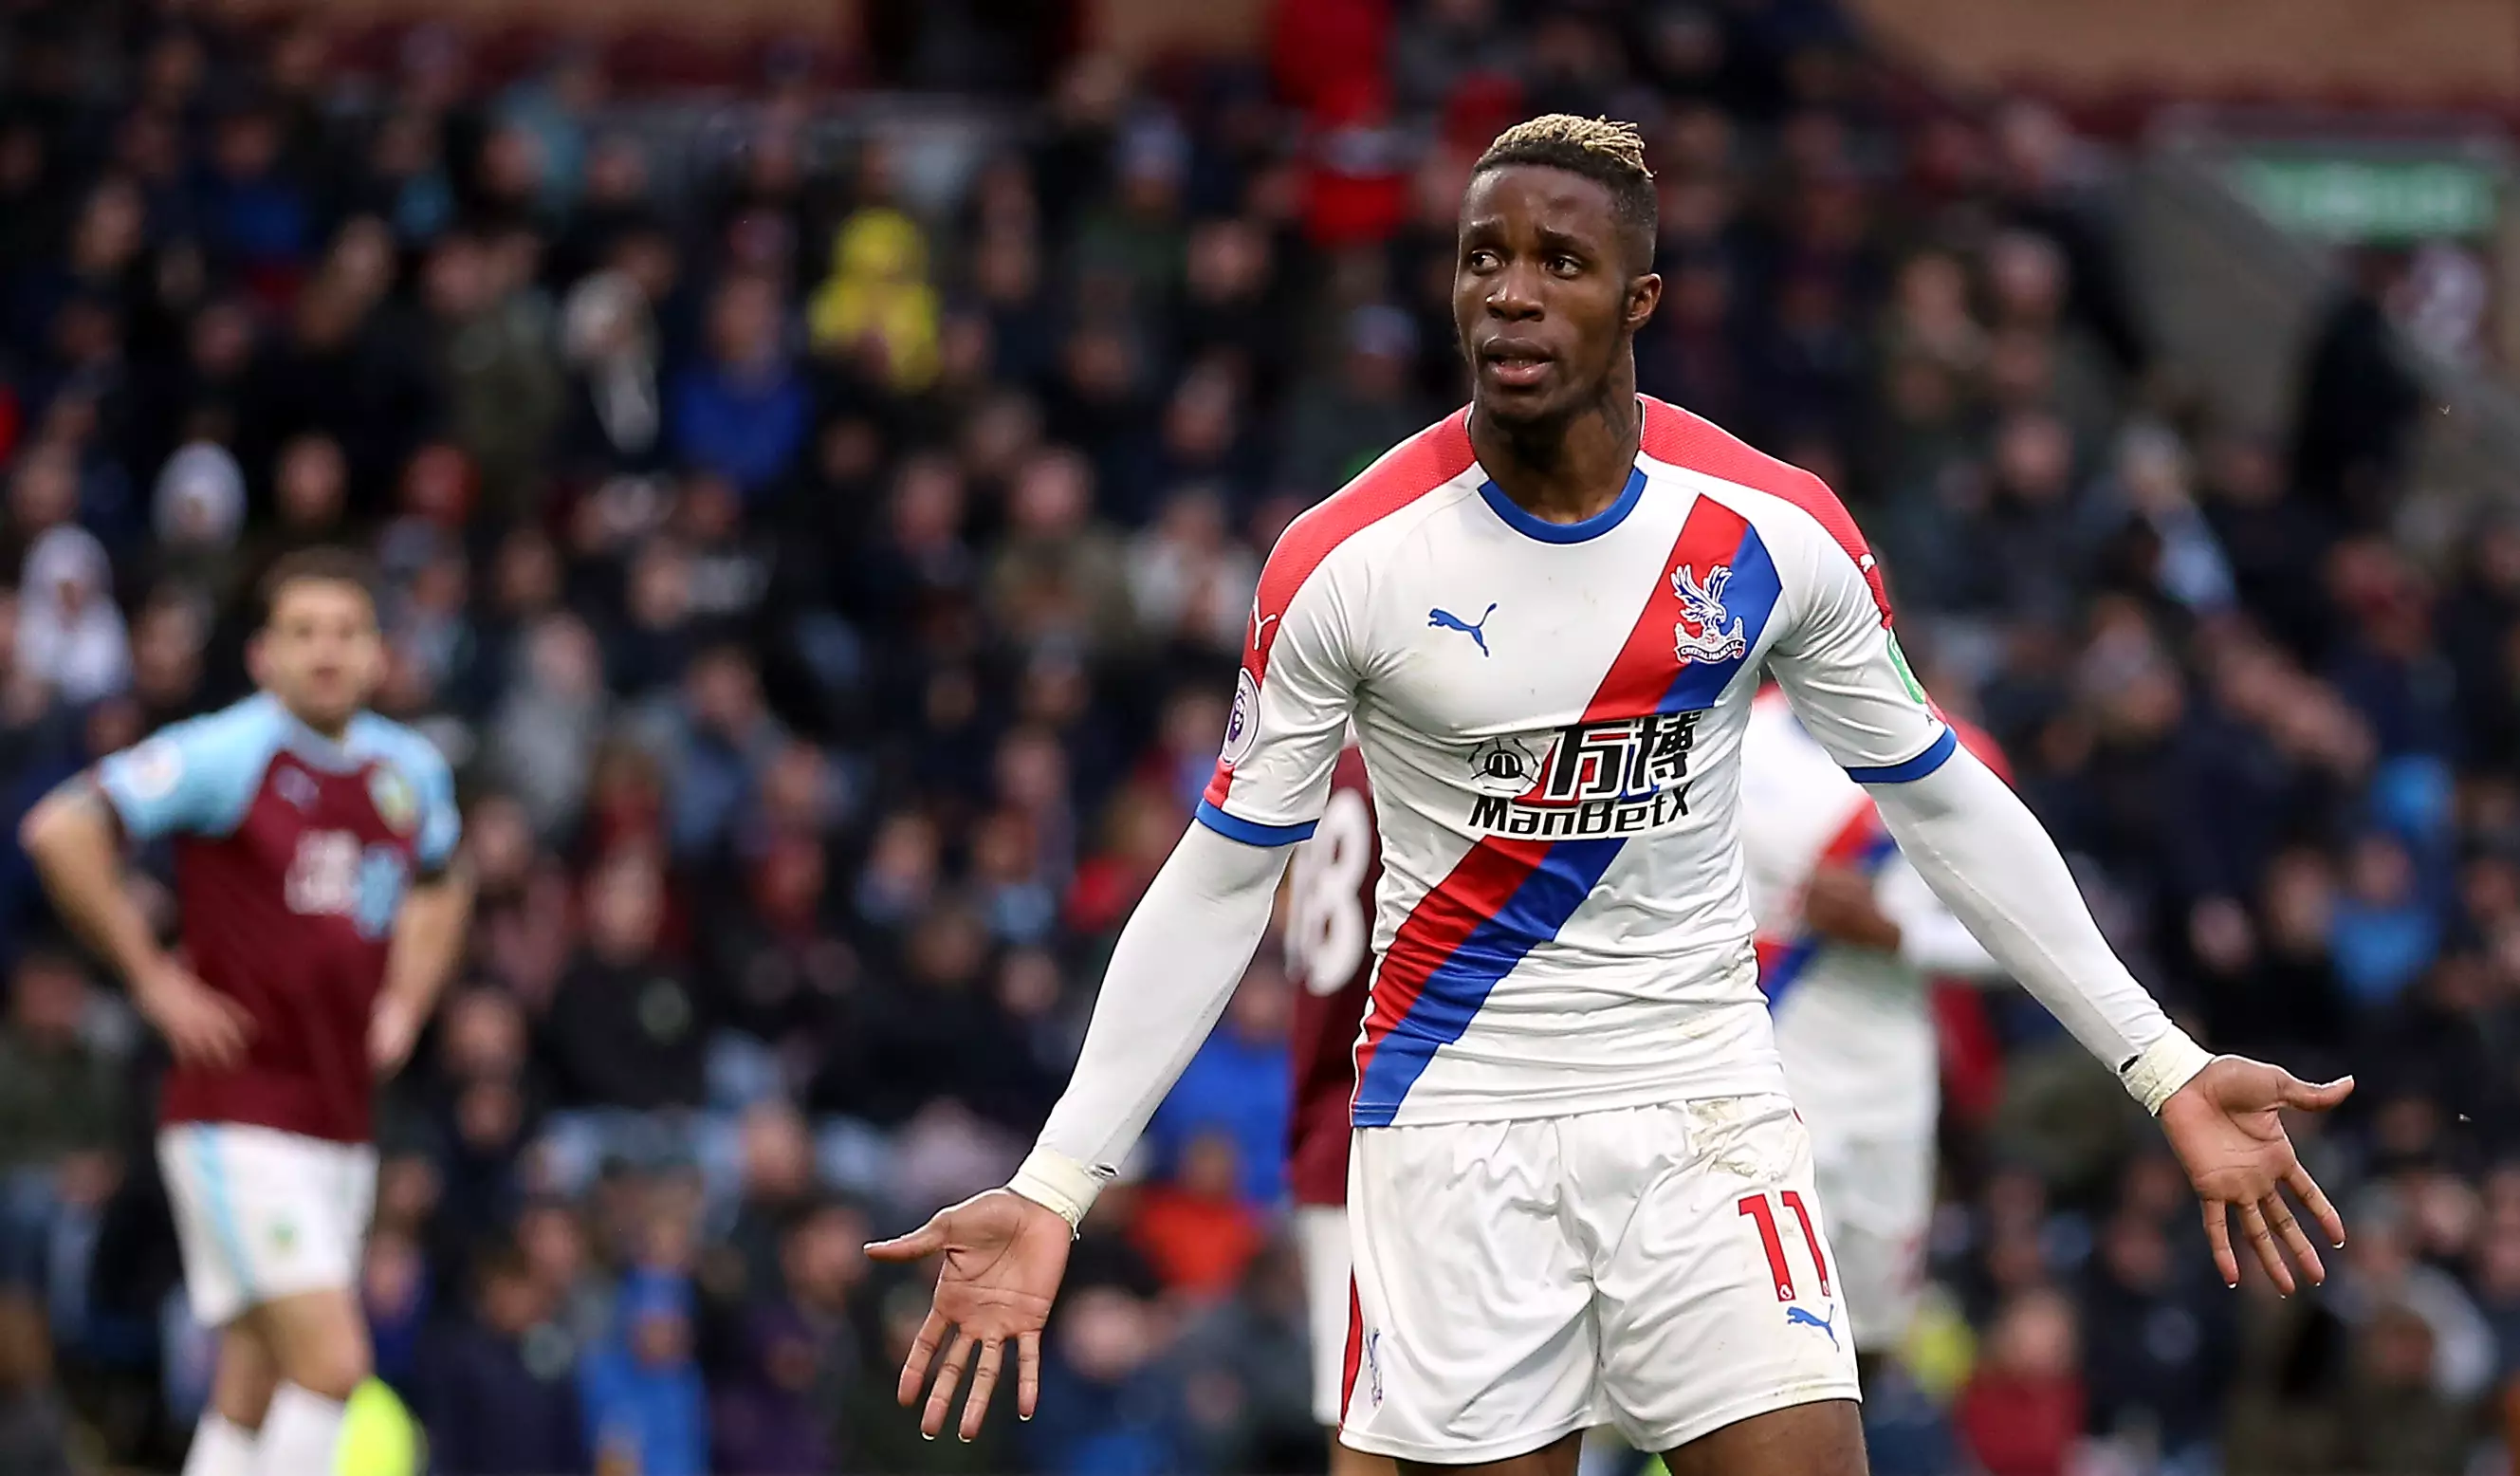 Zaha has become Palace's most important player. Image: PA Images